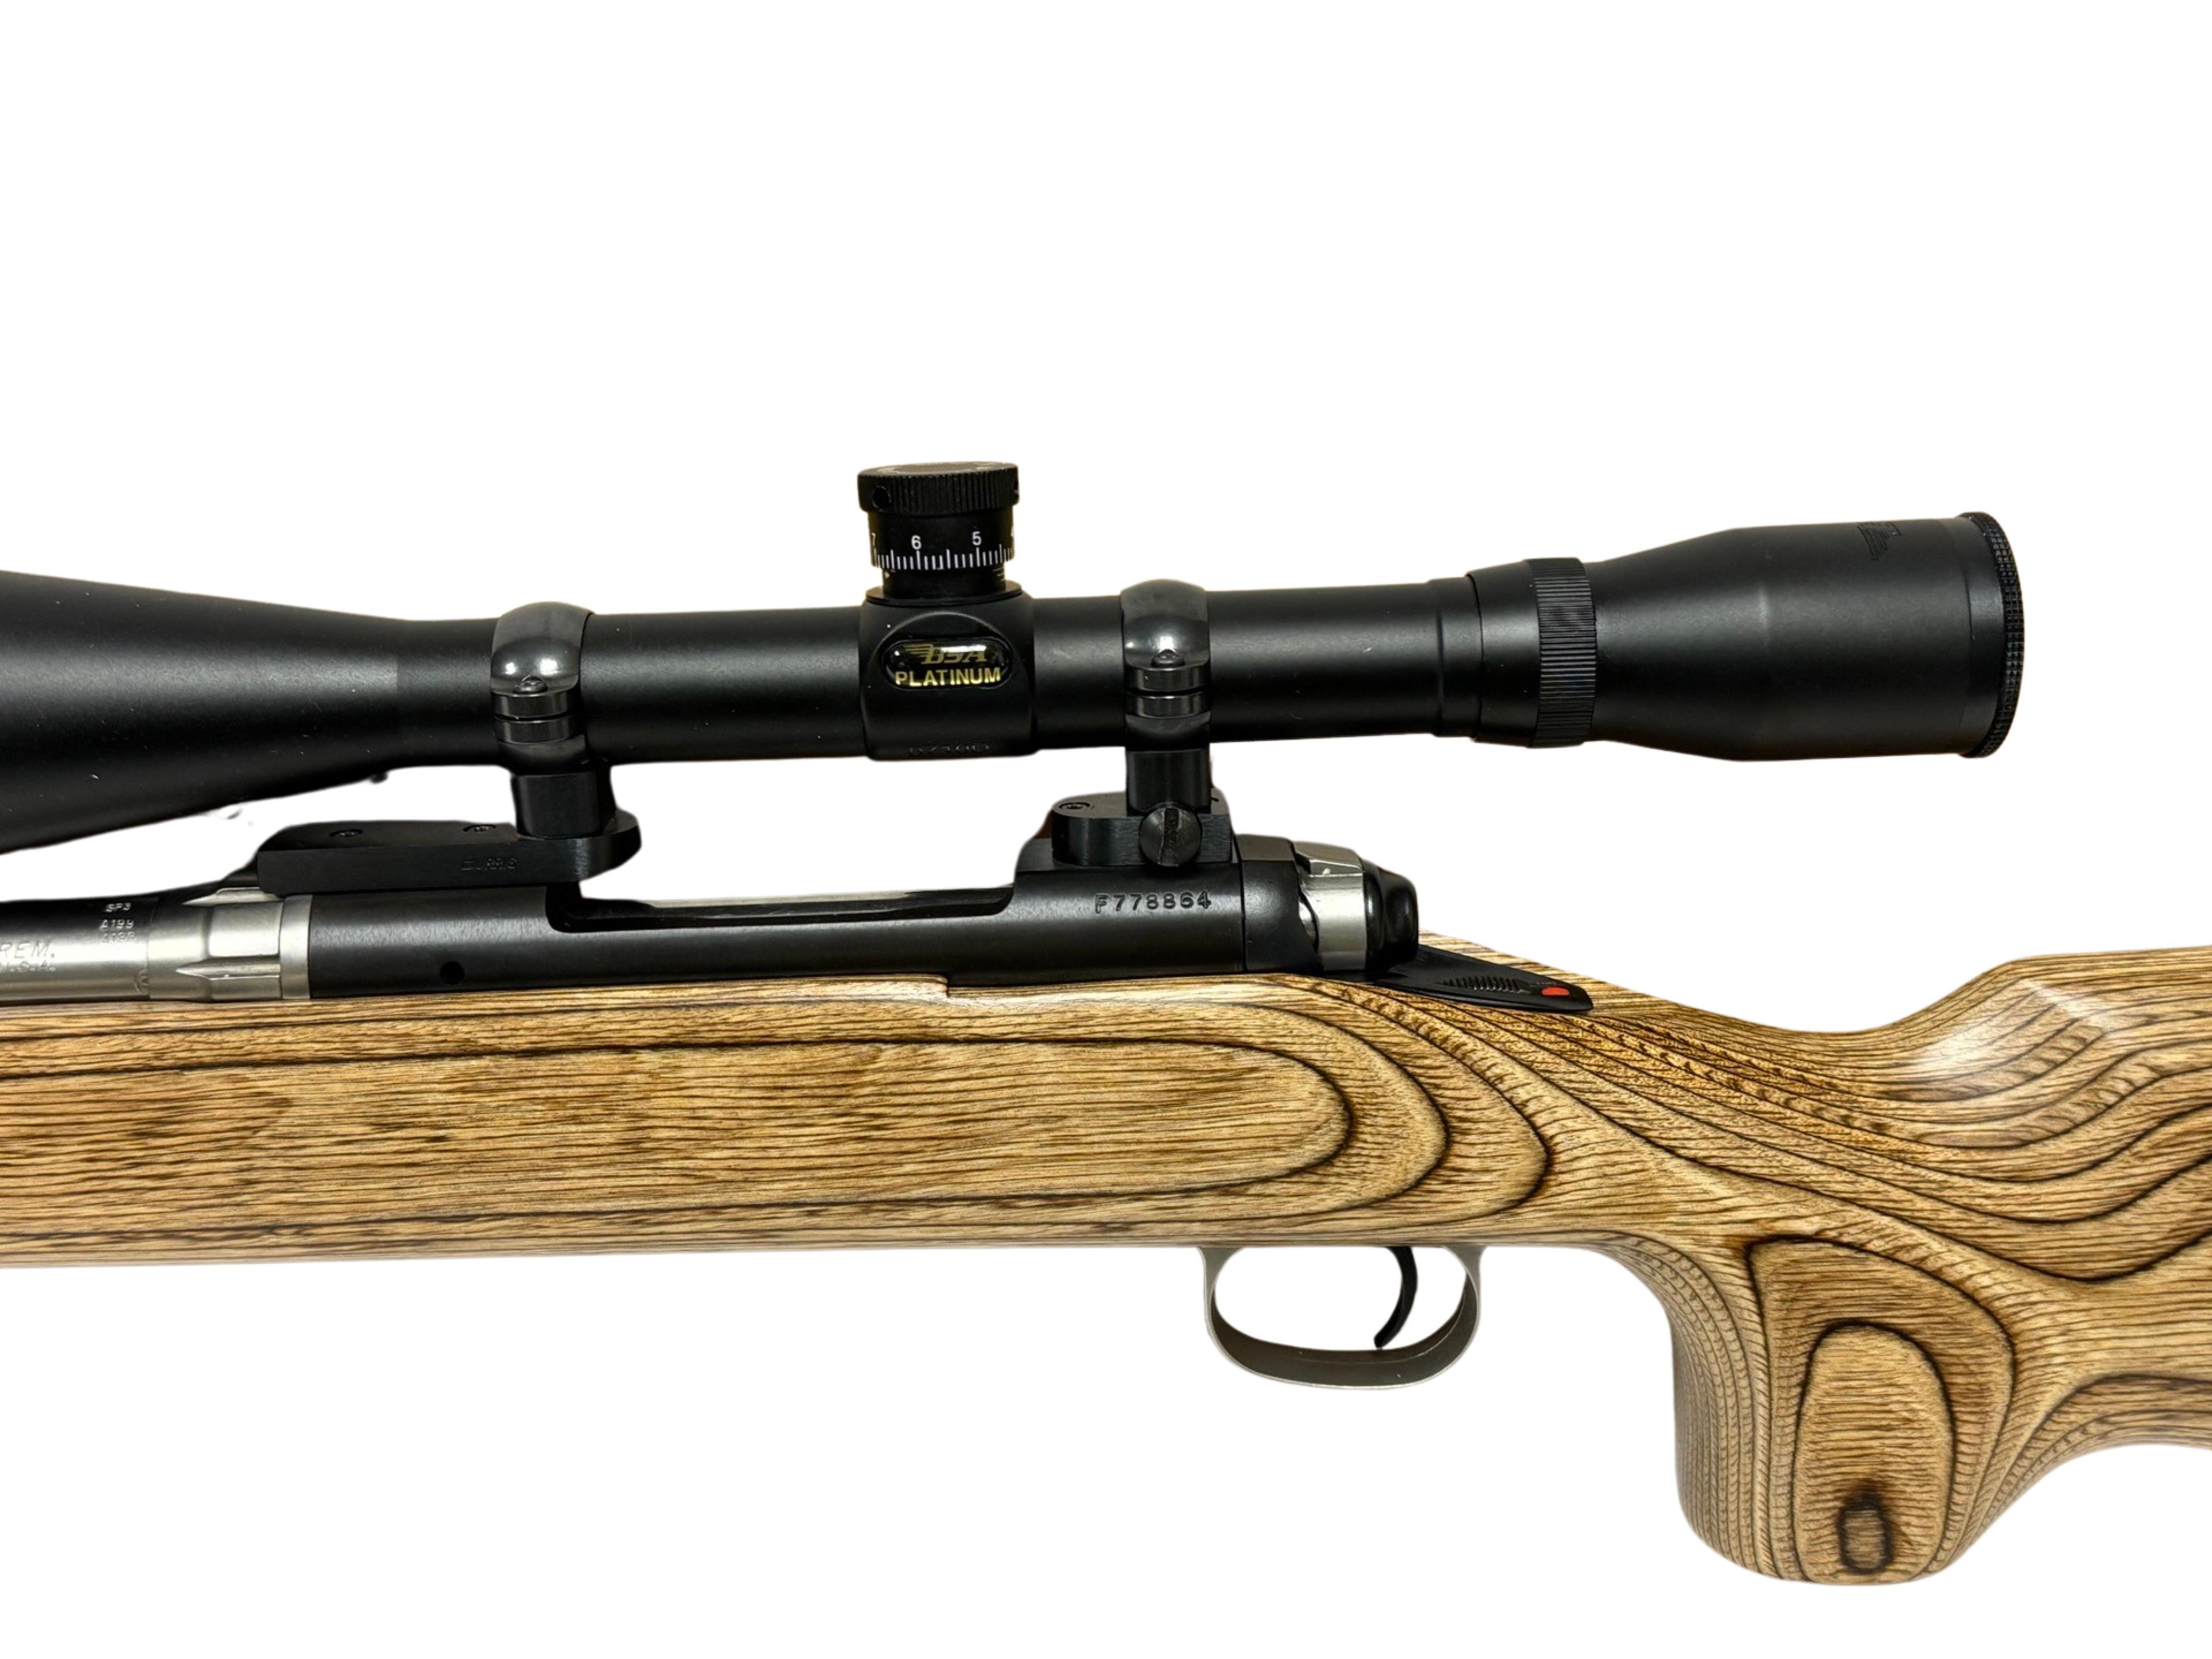 NIB Savage Model 12 BVSS Short Action Stainless Fluted .223 REM. Bolt Action Rifle w/ BSA Scope